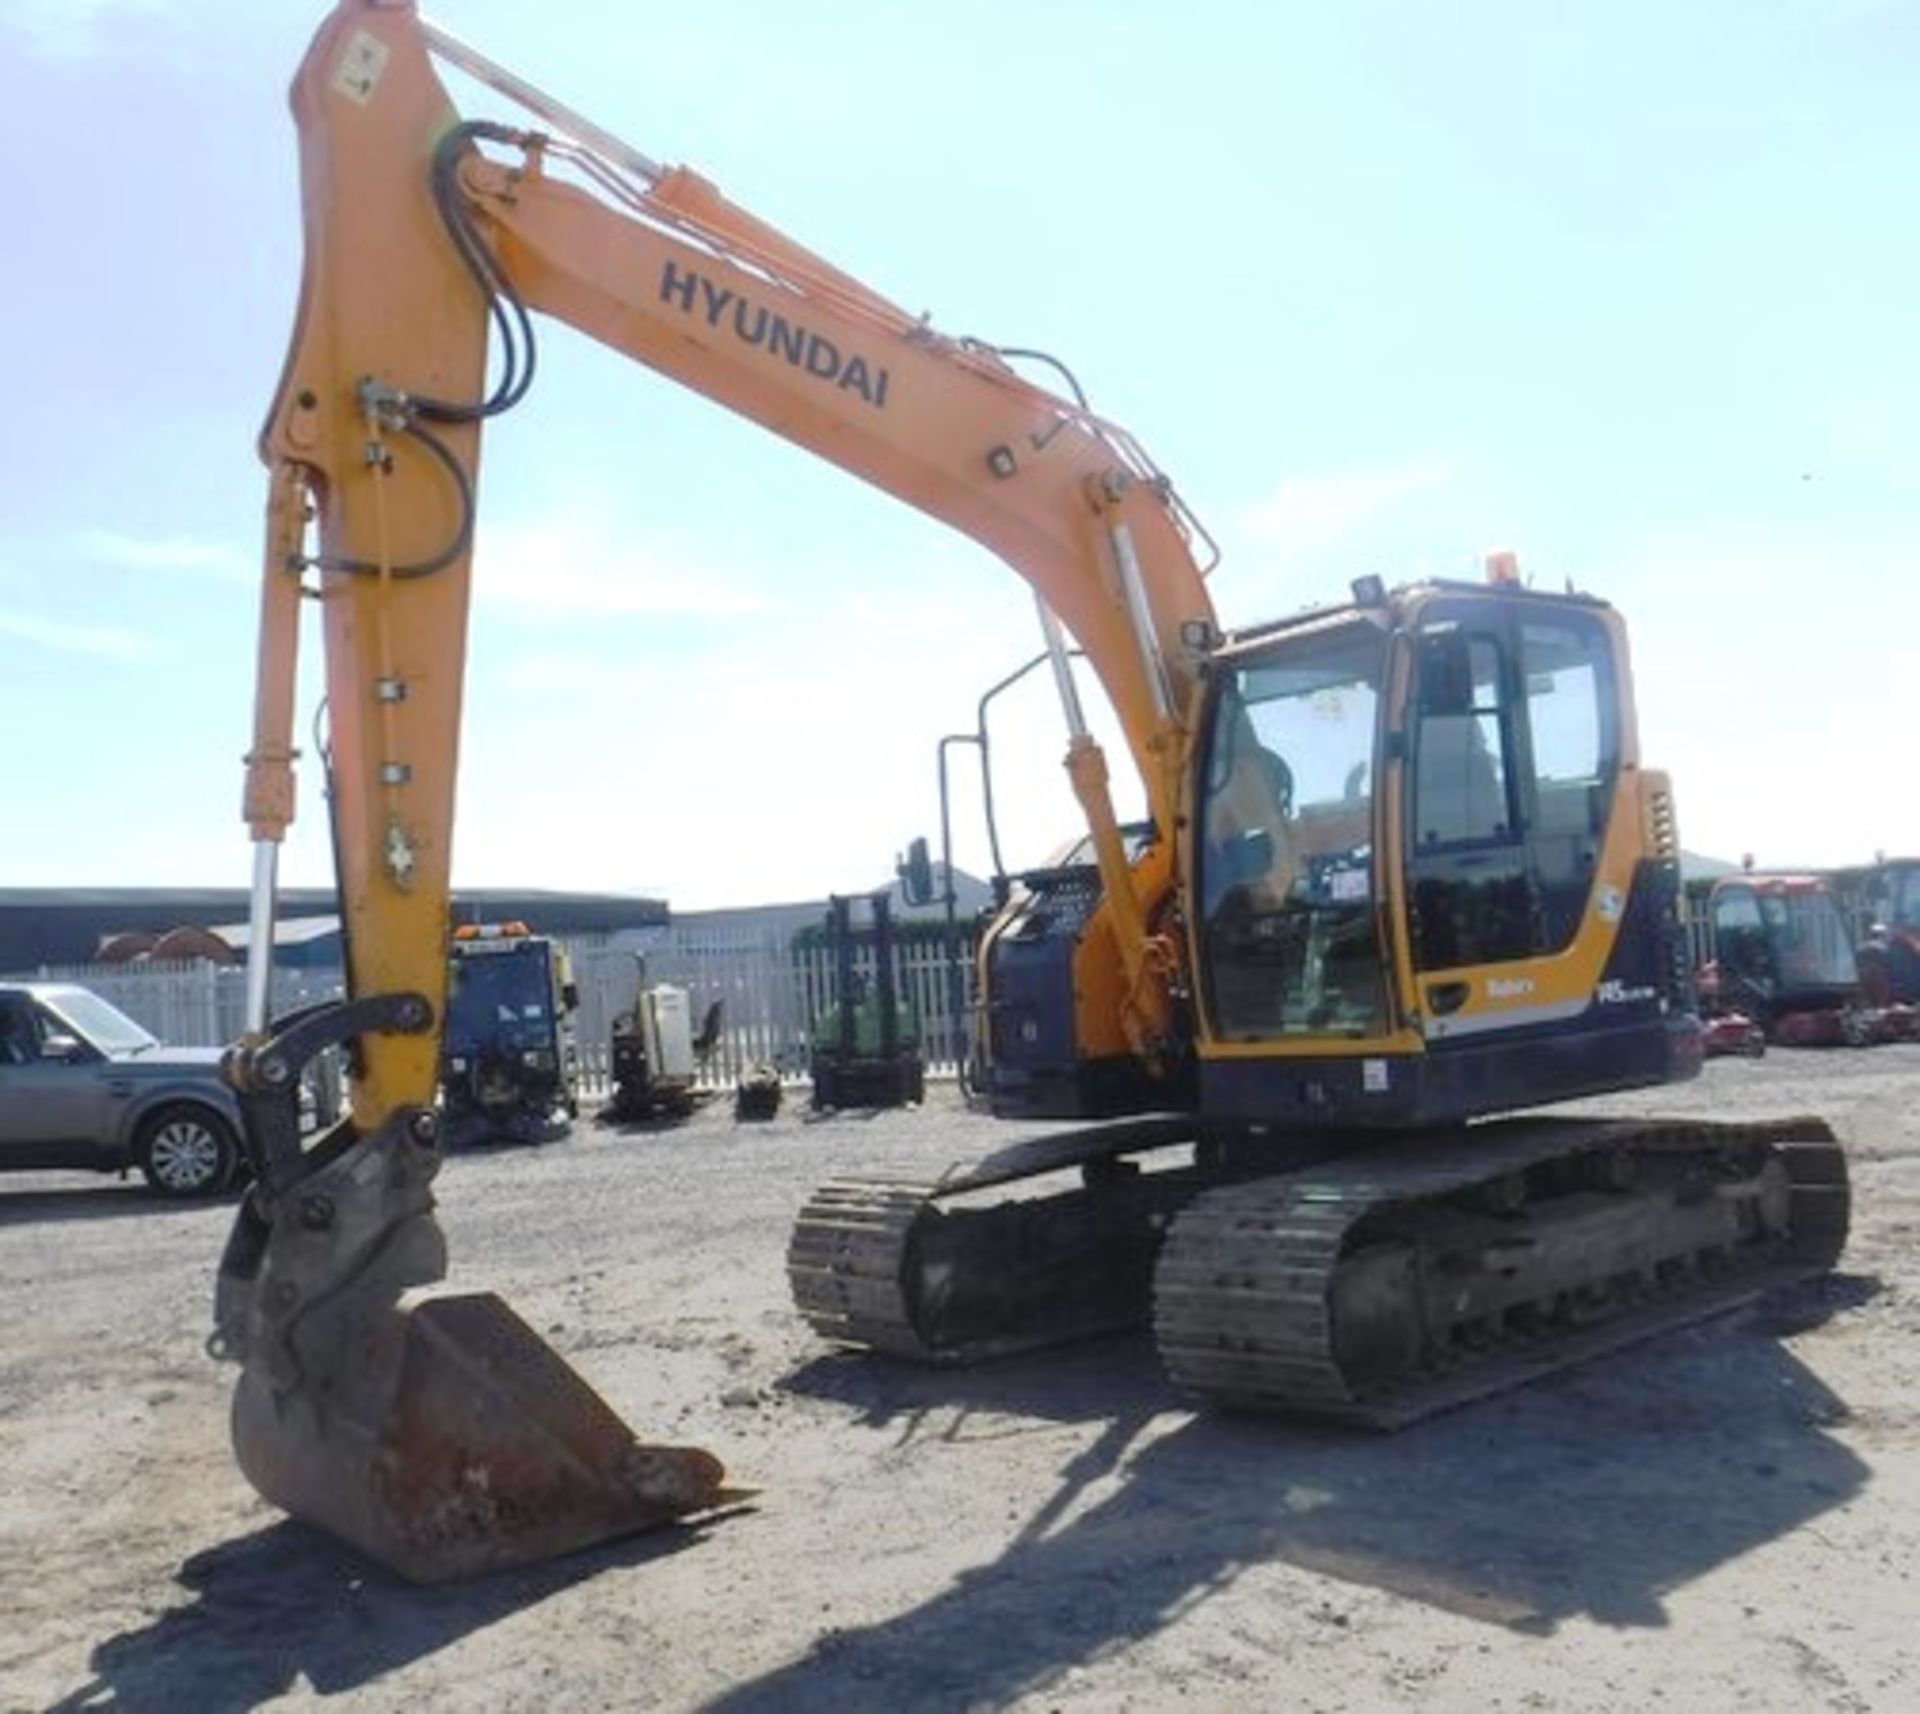 2014 HYUNDAI 145-9A excavator c/w 1 bucket. Short body version ideal for site work. s/n 068. 4263hr - Image 30 of 32